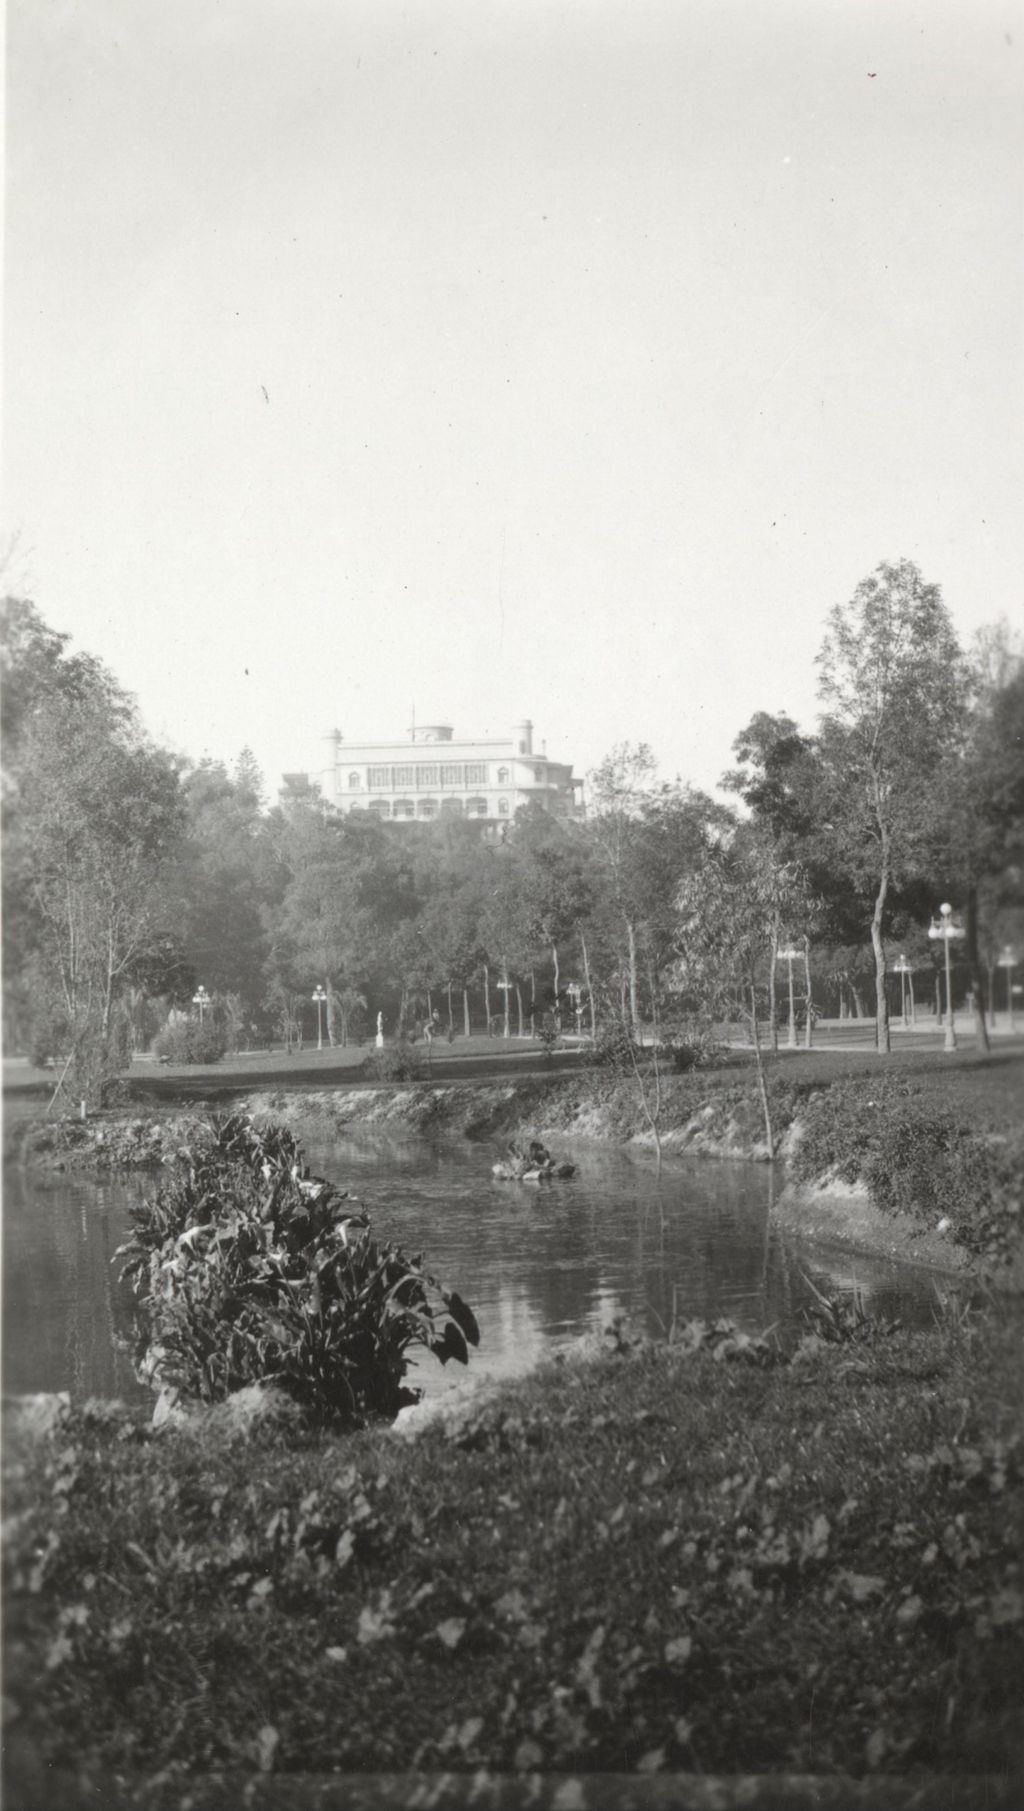 Miniature of Pond photographed on Jane Addams' trip to Mexico